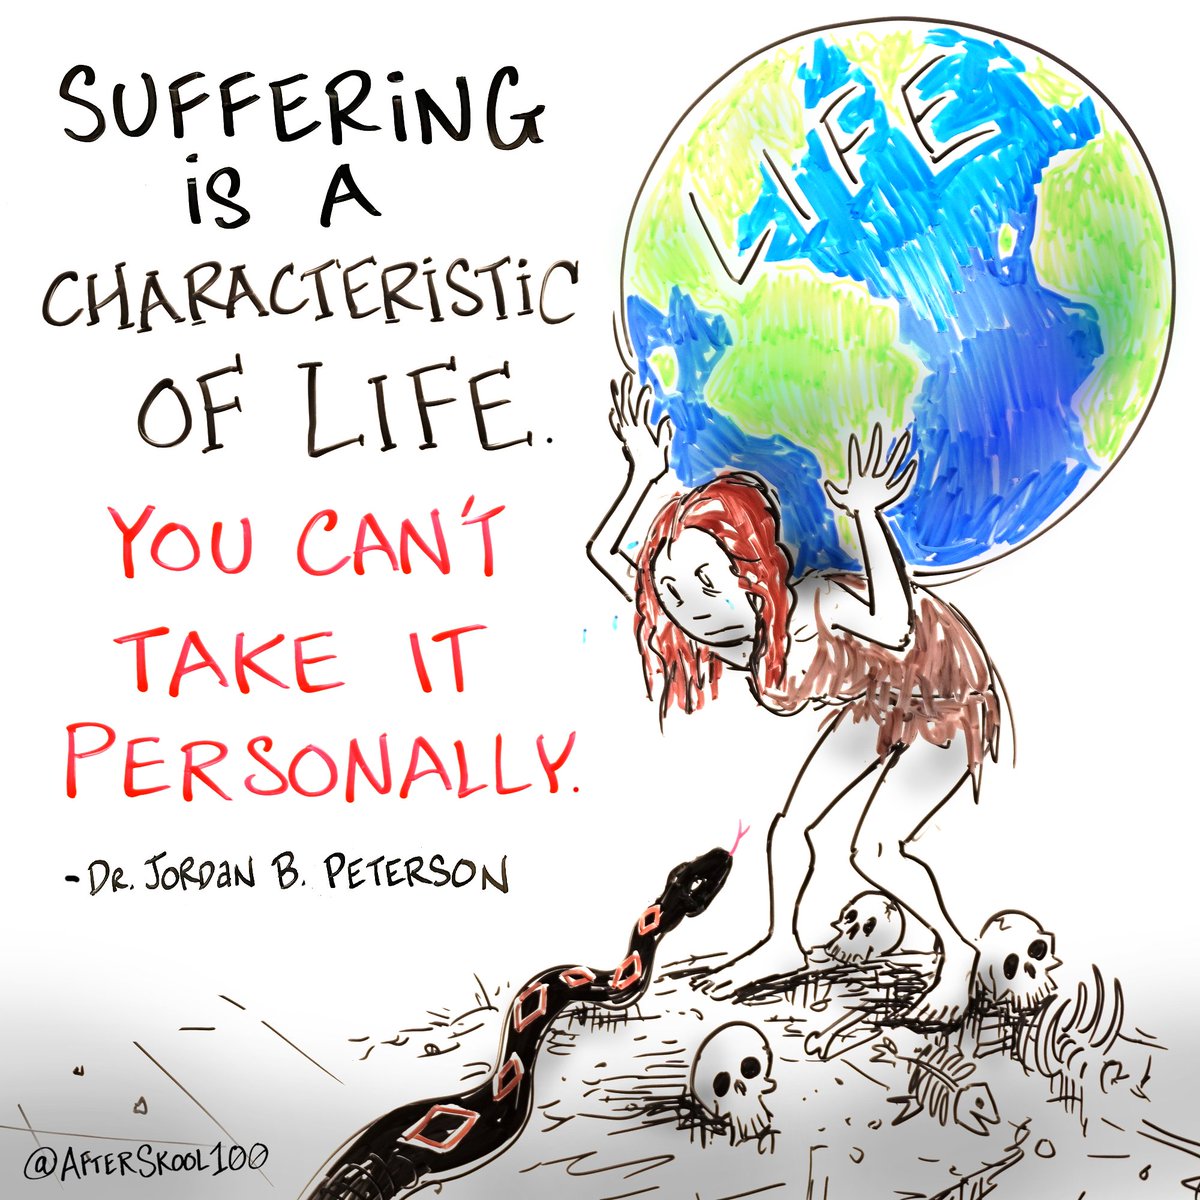 Suffering is a characteristic of life. You can't take it personally.